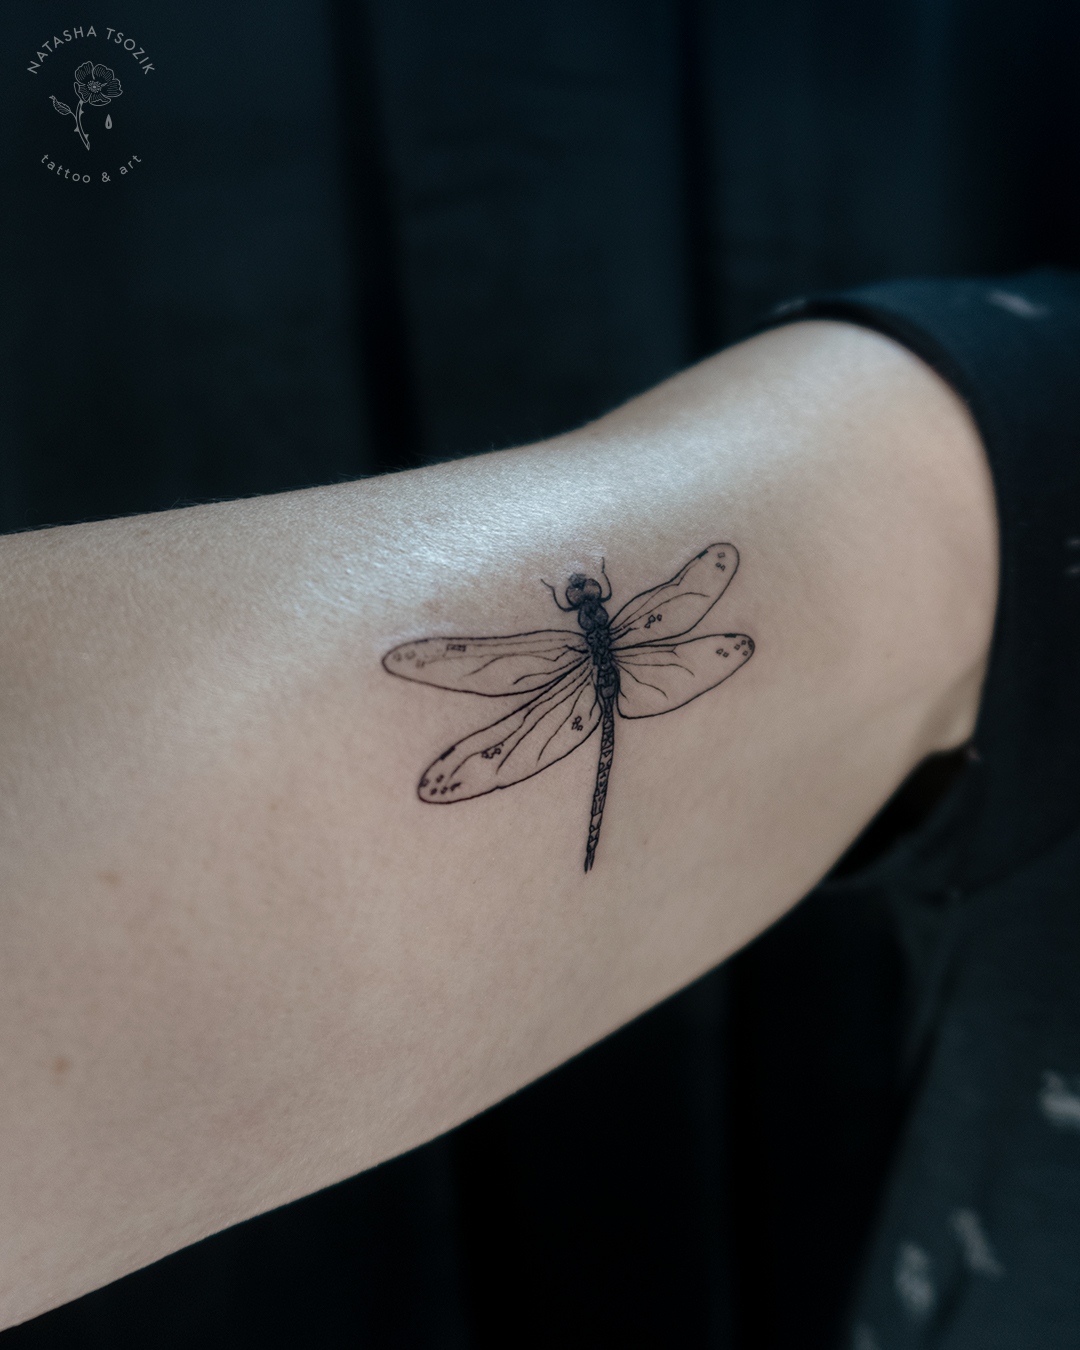 A dragonfly tattoo on an inner bicep.